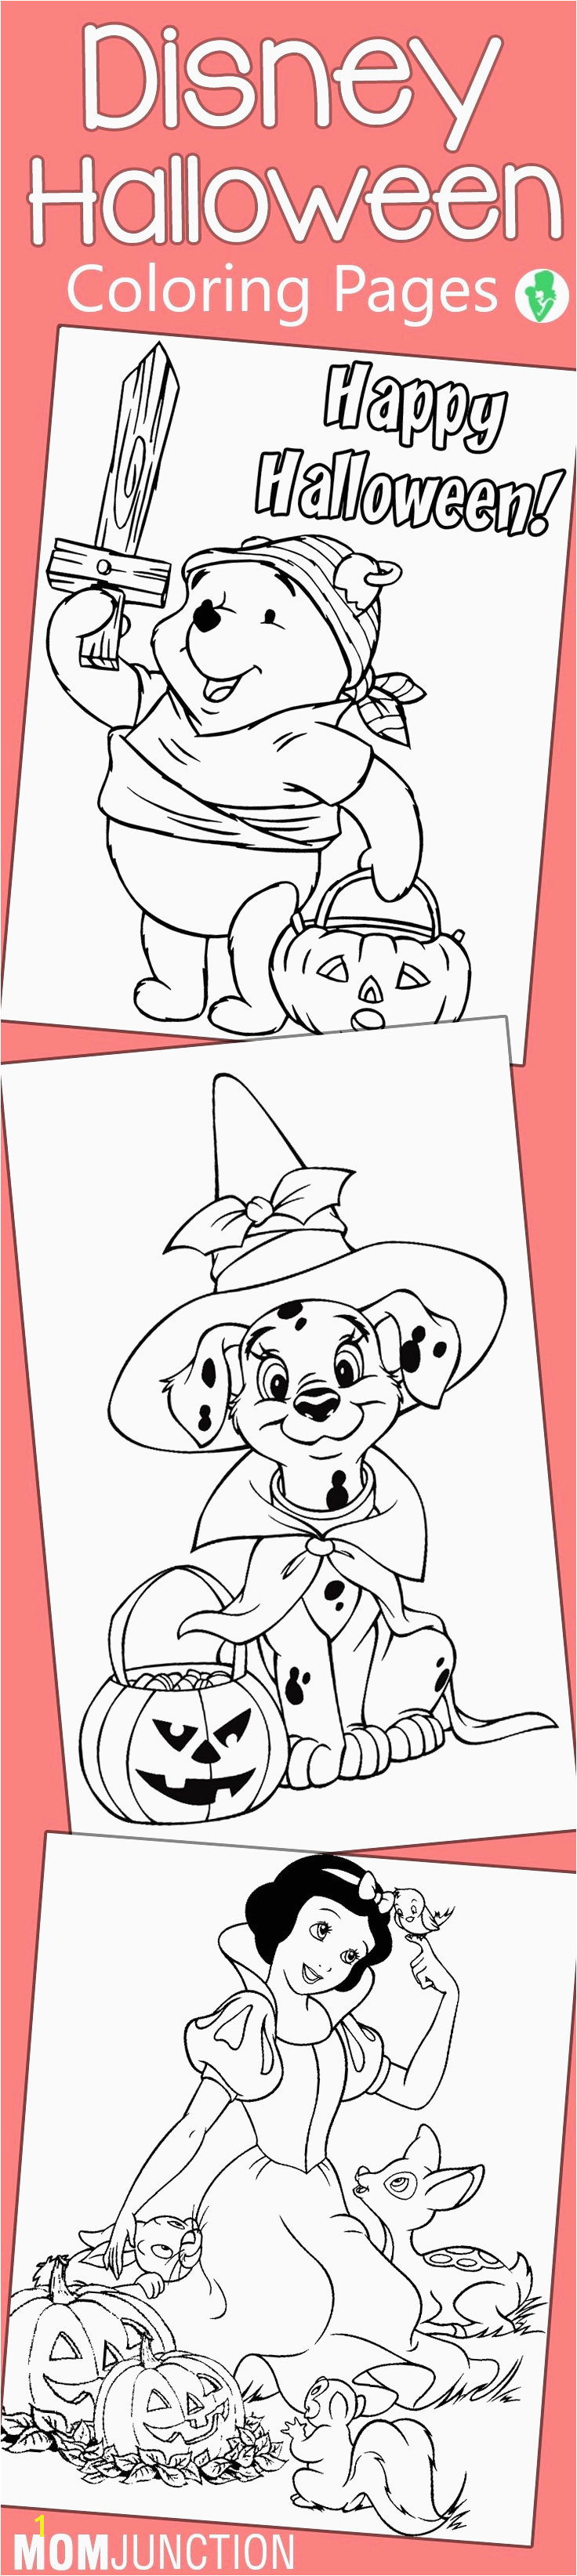 Mom Junction Coloring Pages Scarecrow Coloring Pages Free Unique Christmas Coloring Sheets Free